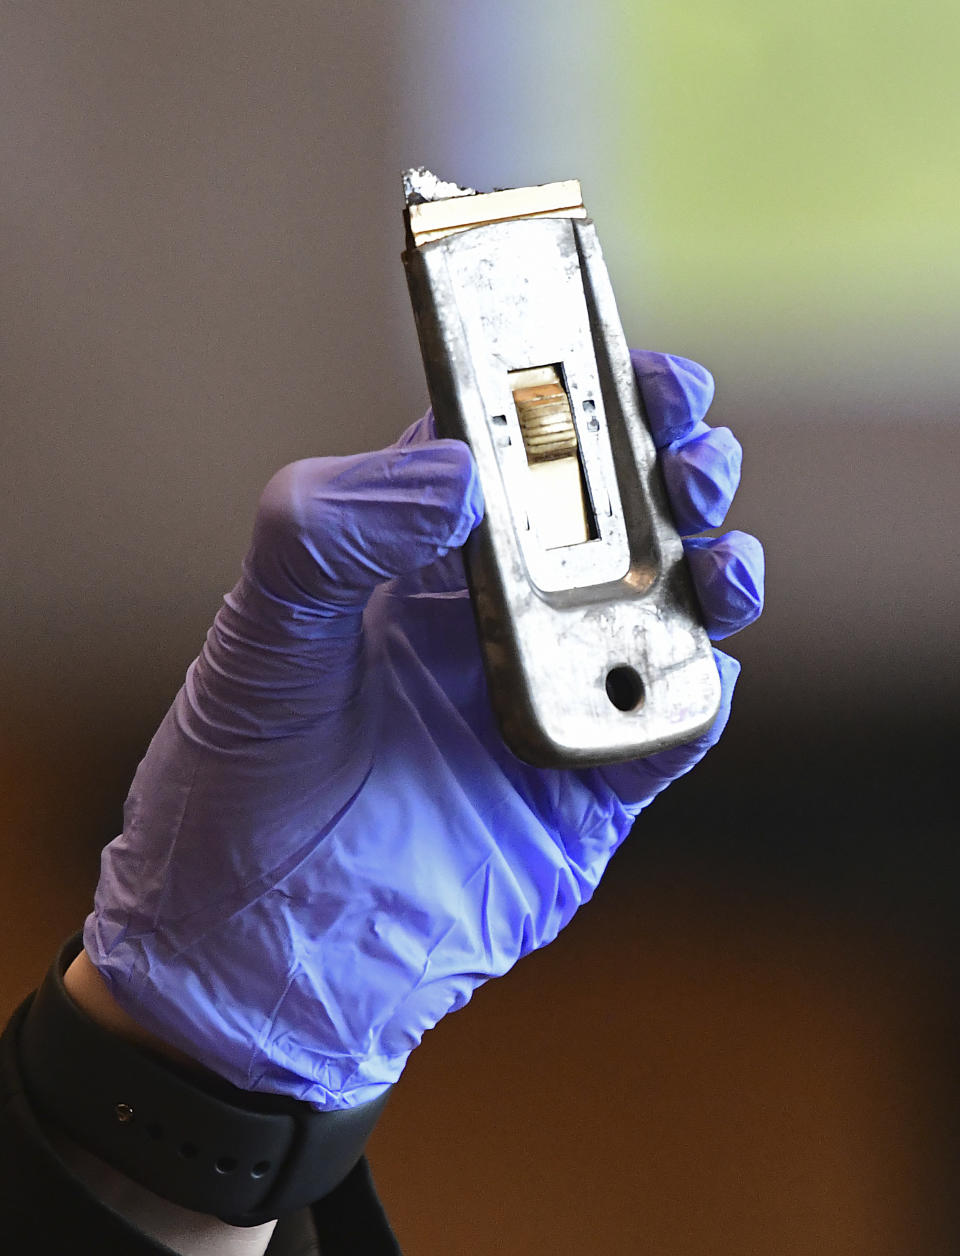 A box cutter with a broken razorblade edge containing a blood-like stain seized from a trash can on Albany Avenue in Hartford is presented as evidence on day eight of Michelle Troconis' criminal trial at Connecticut Superior Court in Stamford, Conn. Tuesday, Jan. 23, 2024. Troconis is on trial for charges related to the disappearance and death of New Canaan resident Jennifer Dulos. (Tyler Sizemore/Hearst Connecticut Media via AP, Pool)